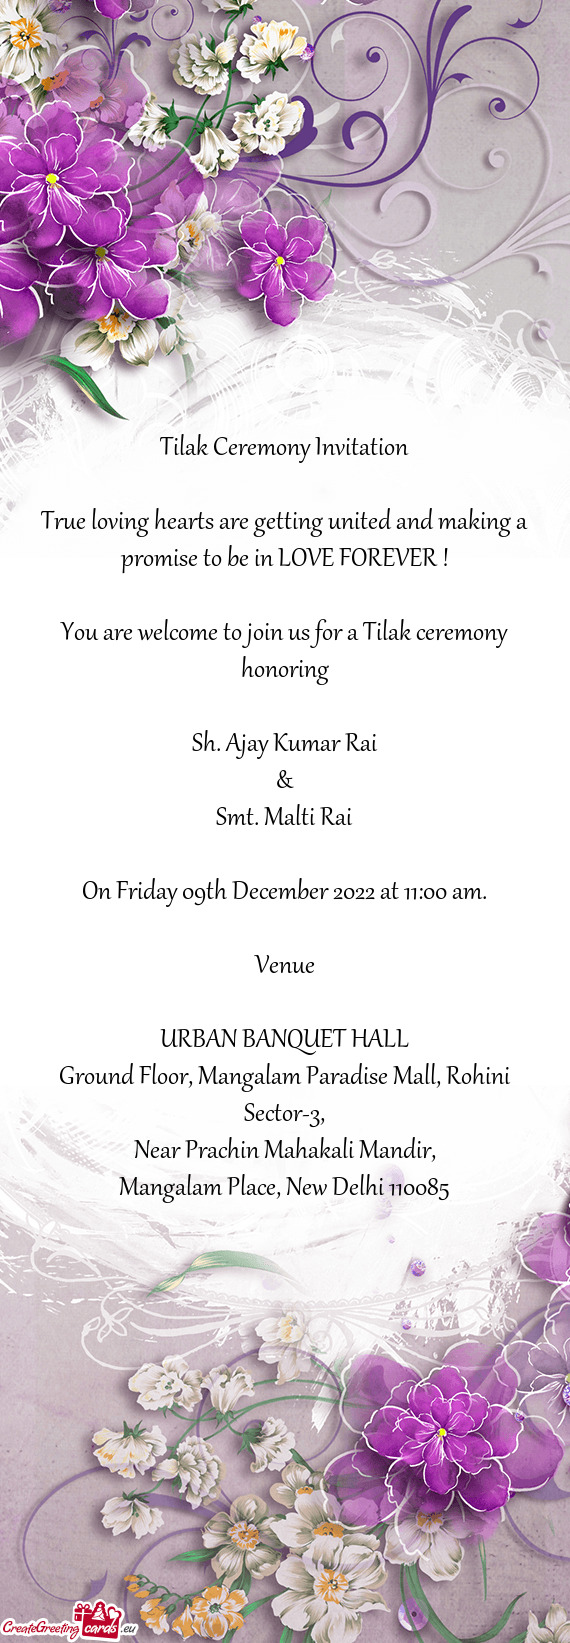 You are welcome to join us for a Tilak ceremony honoring